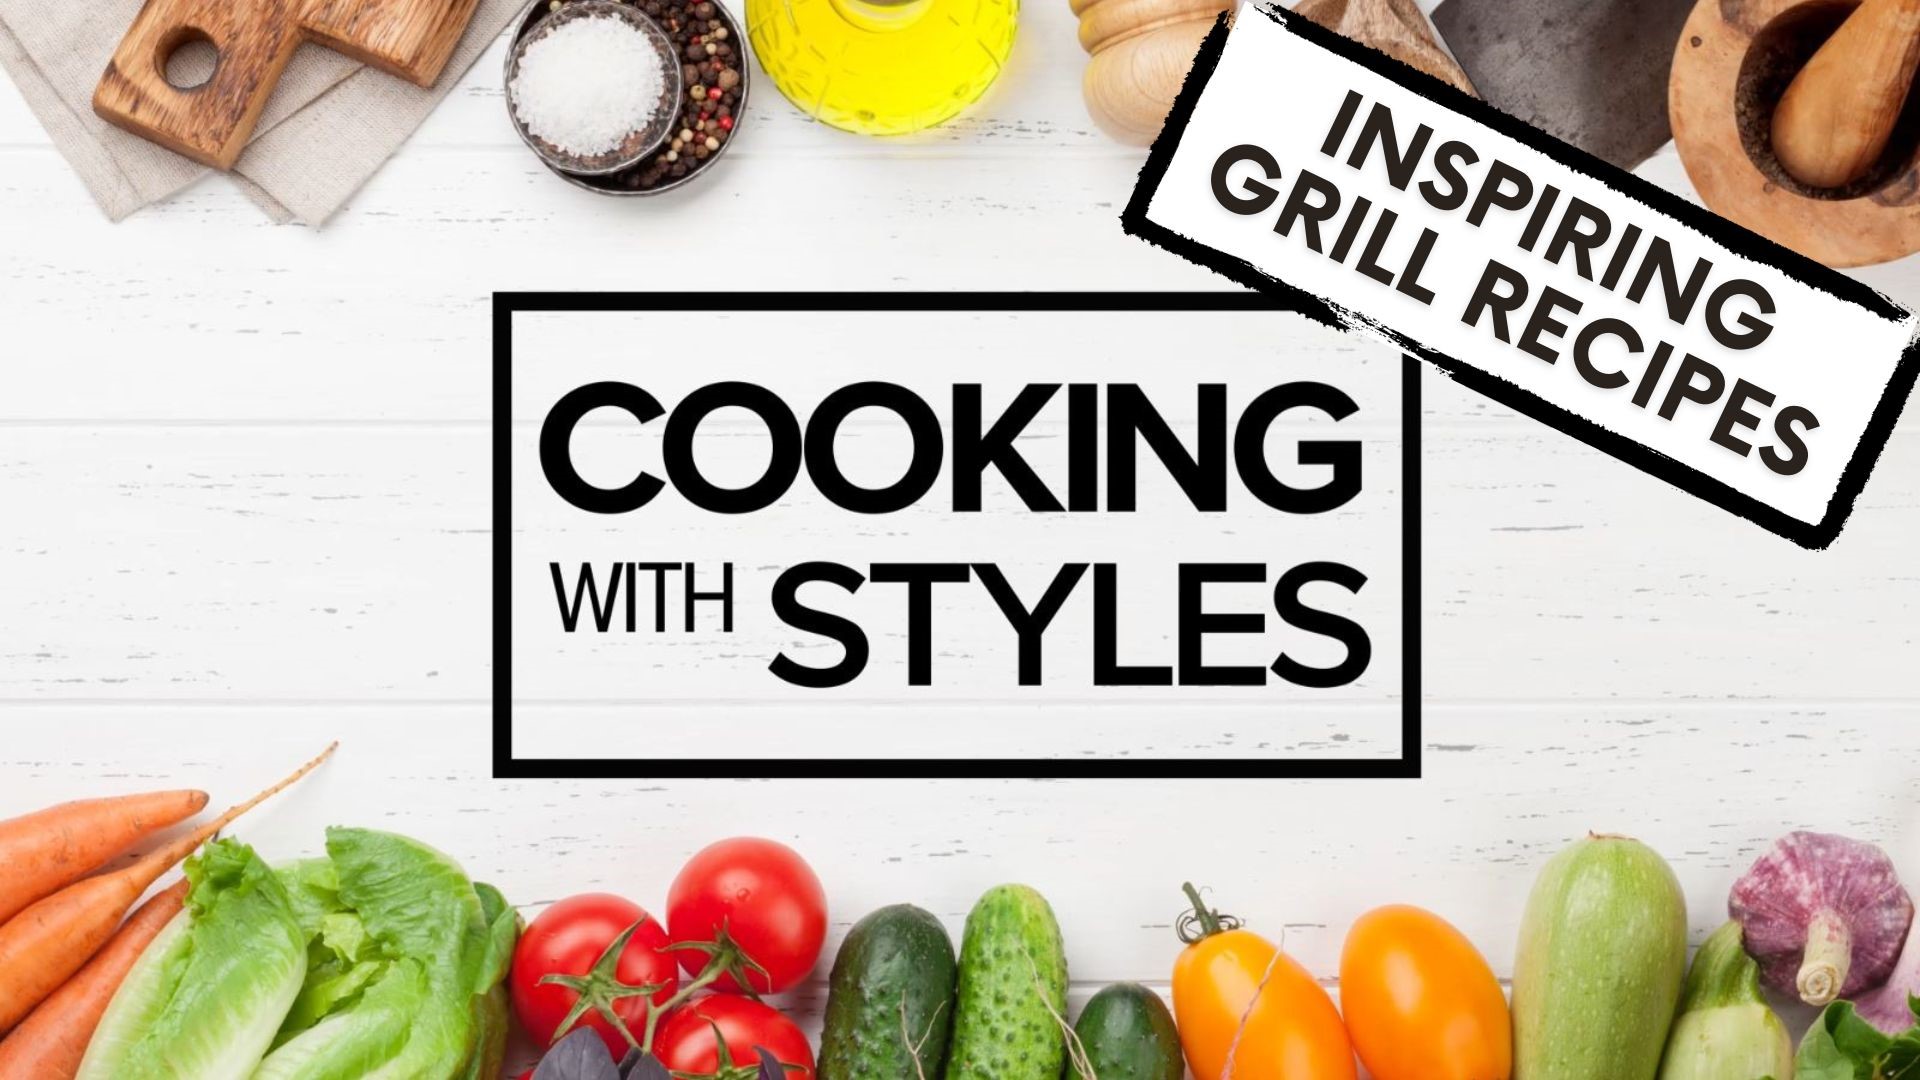 Shawn Styles shares some of his most unique and inspiring recipes to keep you out at the grill. From pork chops to eggplant polenta caprese and more.